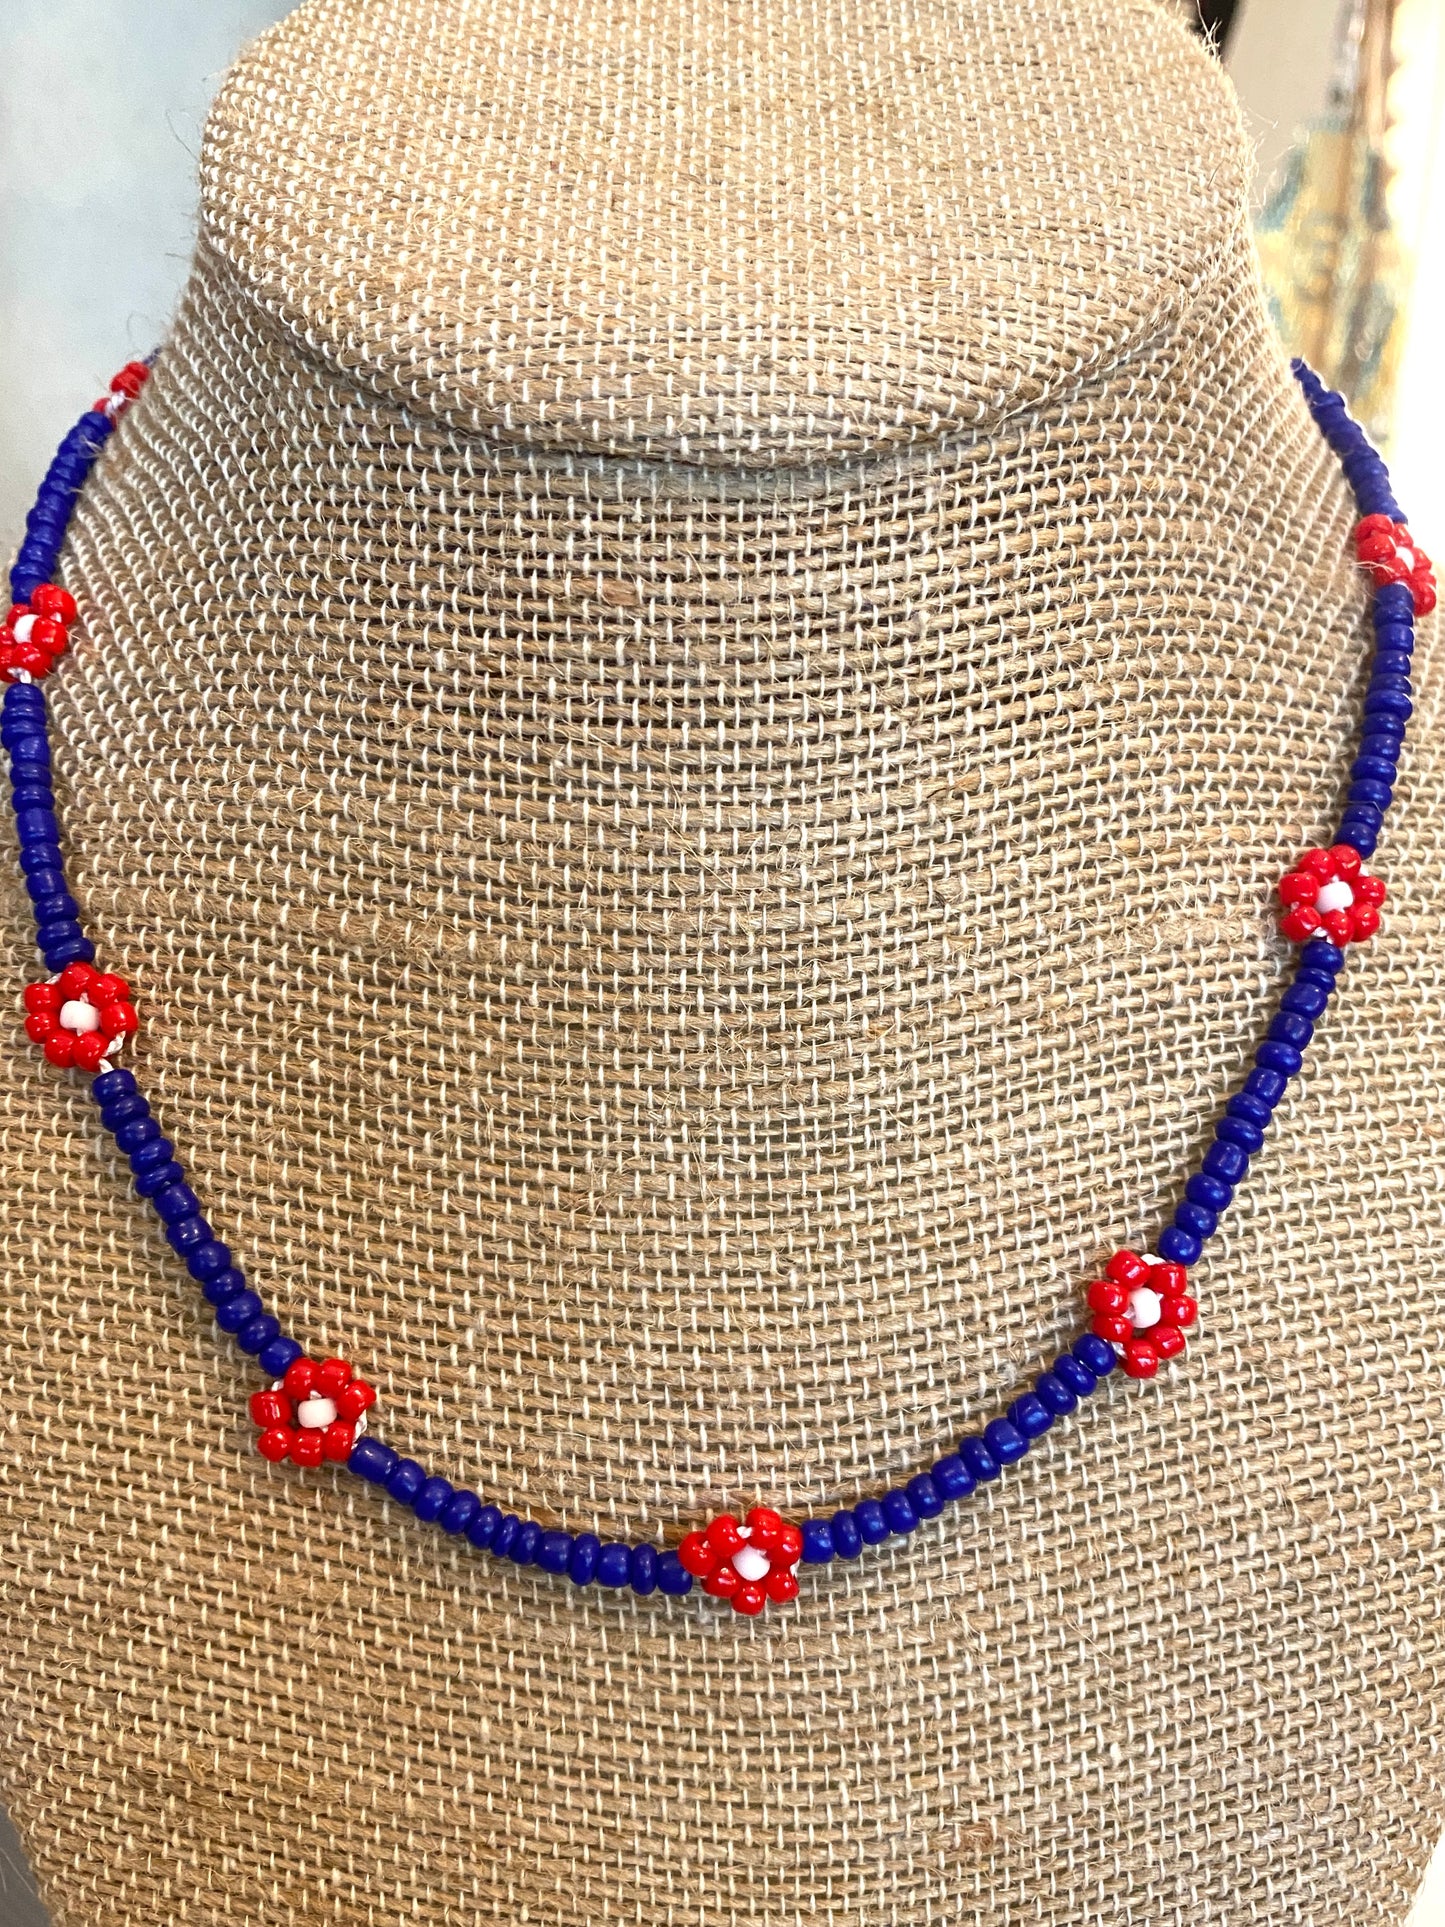 Tiny Royal Blue Beaded Necklace With Red and White Flowers